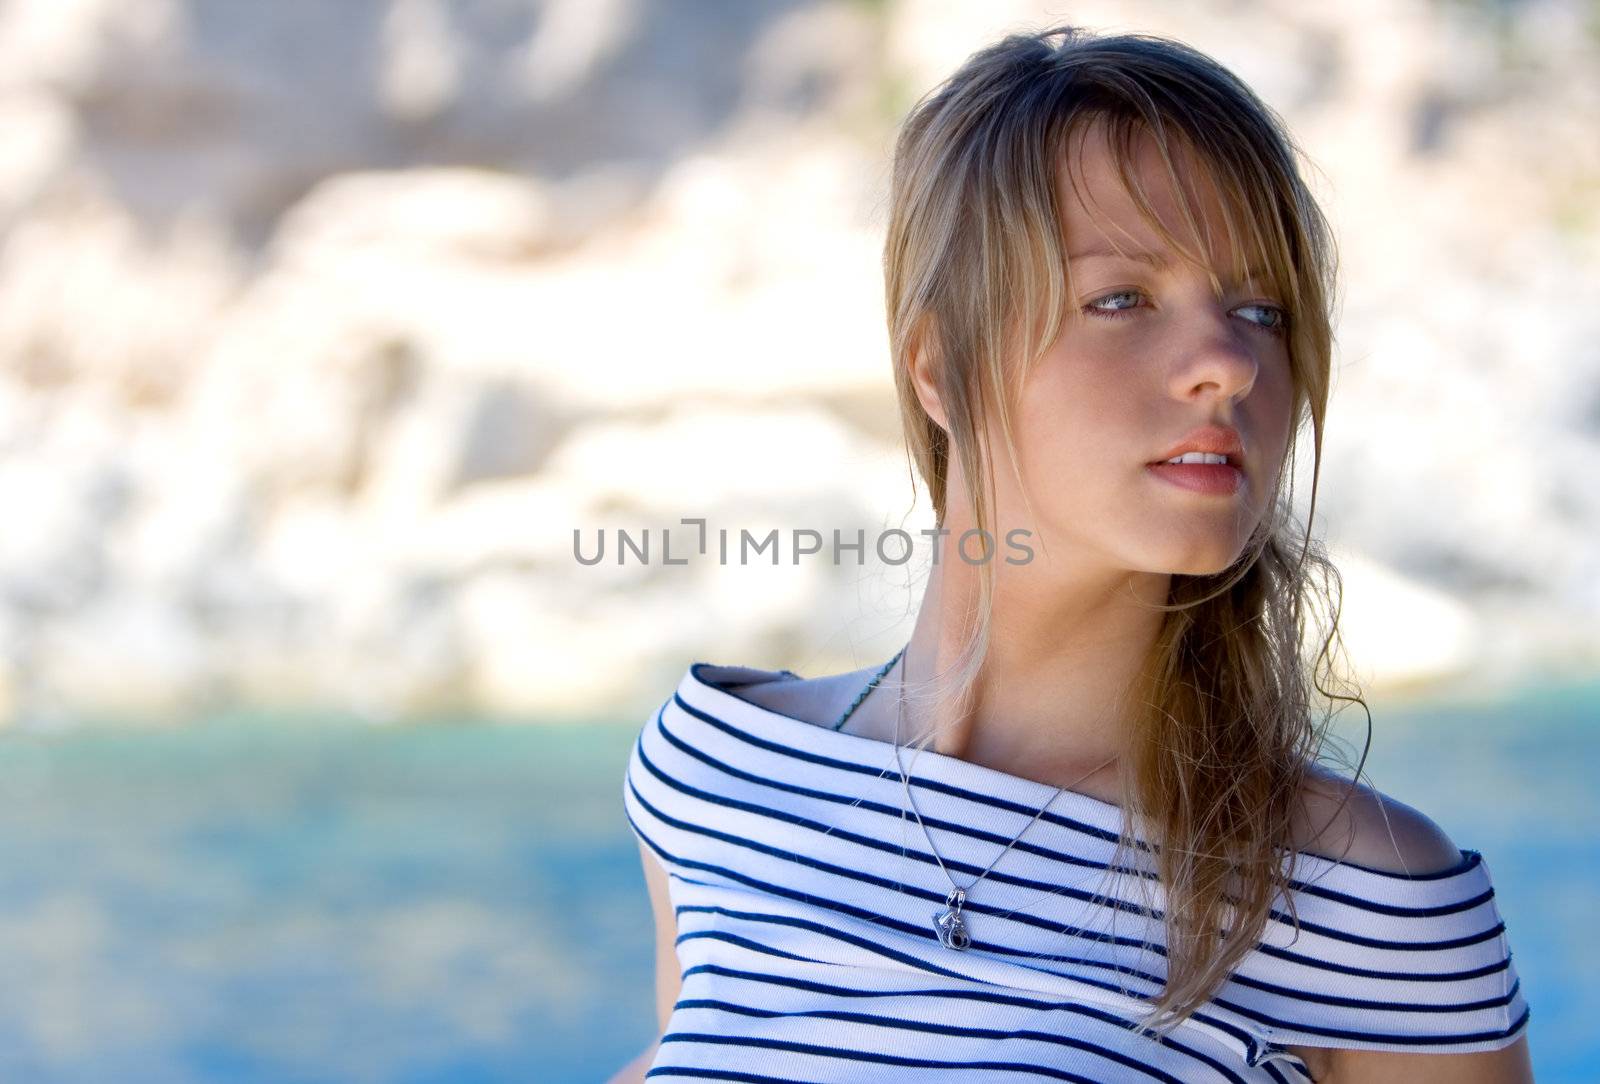 Beautiful young woman on a daily boat trip by mihhailov